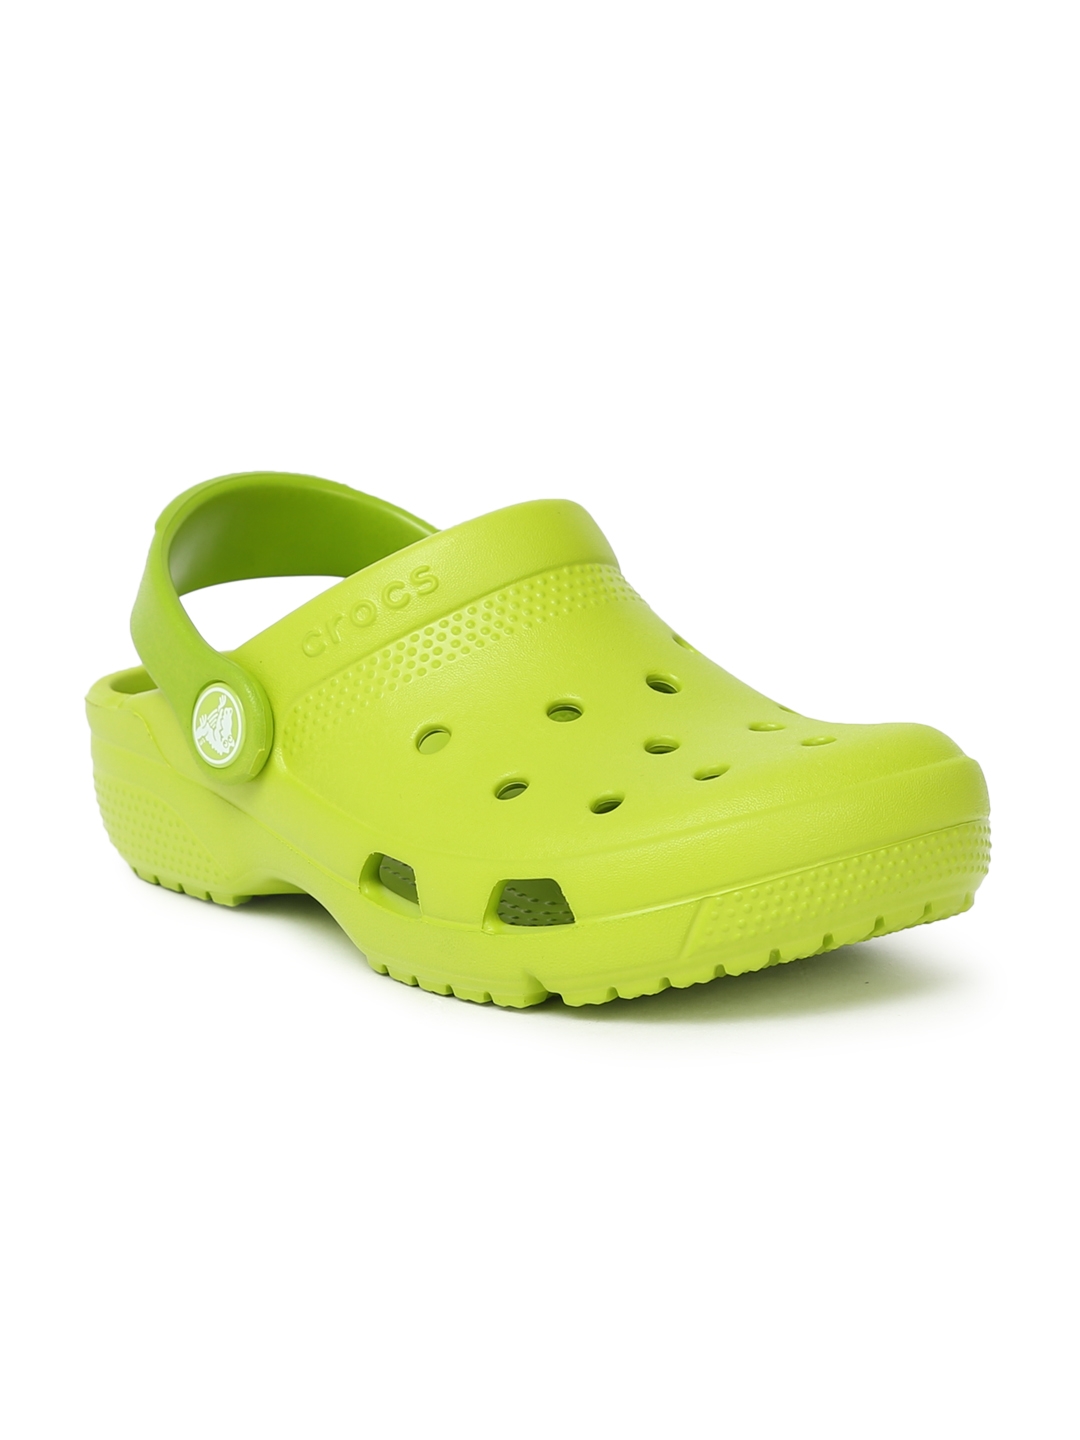 lime green clogs